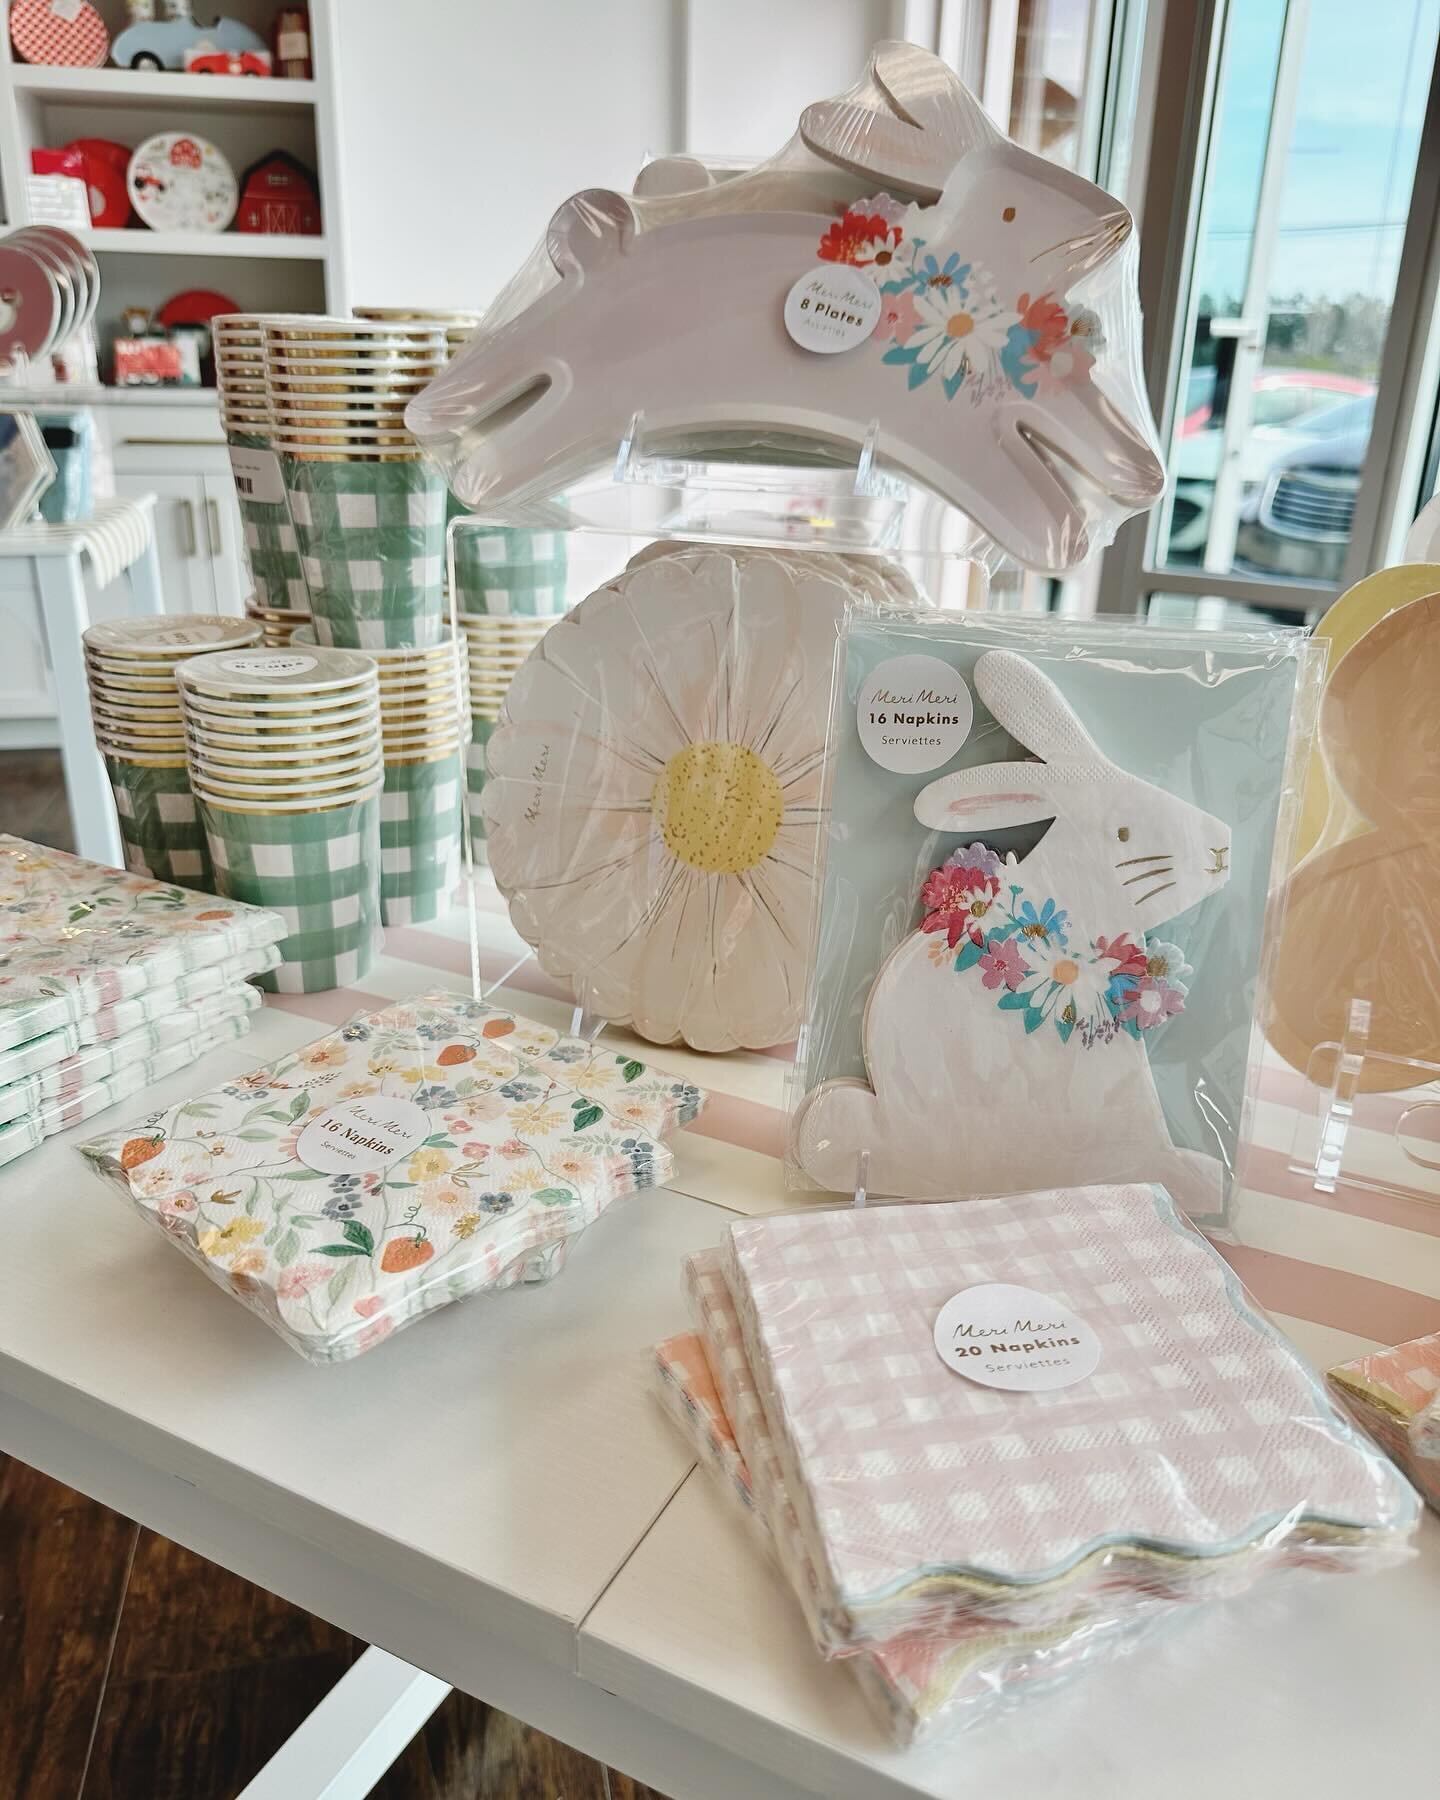 We are fully restocked with the most adorable party products!!! Hello, Spring 🐰 🌸Come shop with us!!

#partyideas #easterdecor #easterweekend #partyshop #partystore #shopsmall #cummingga #partyplanner #partyplanning #kidsparty